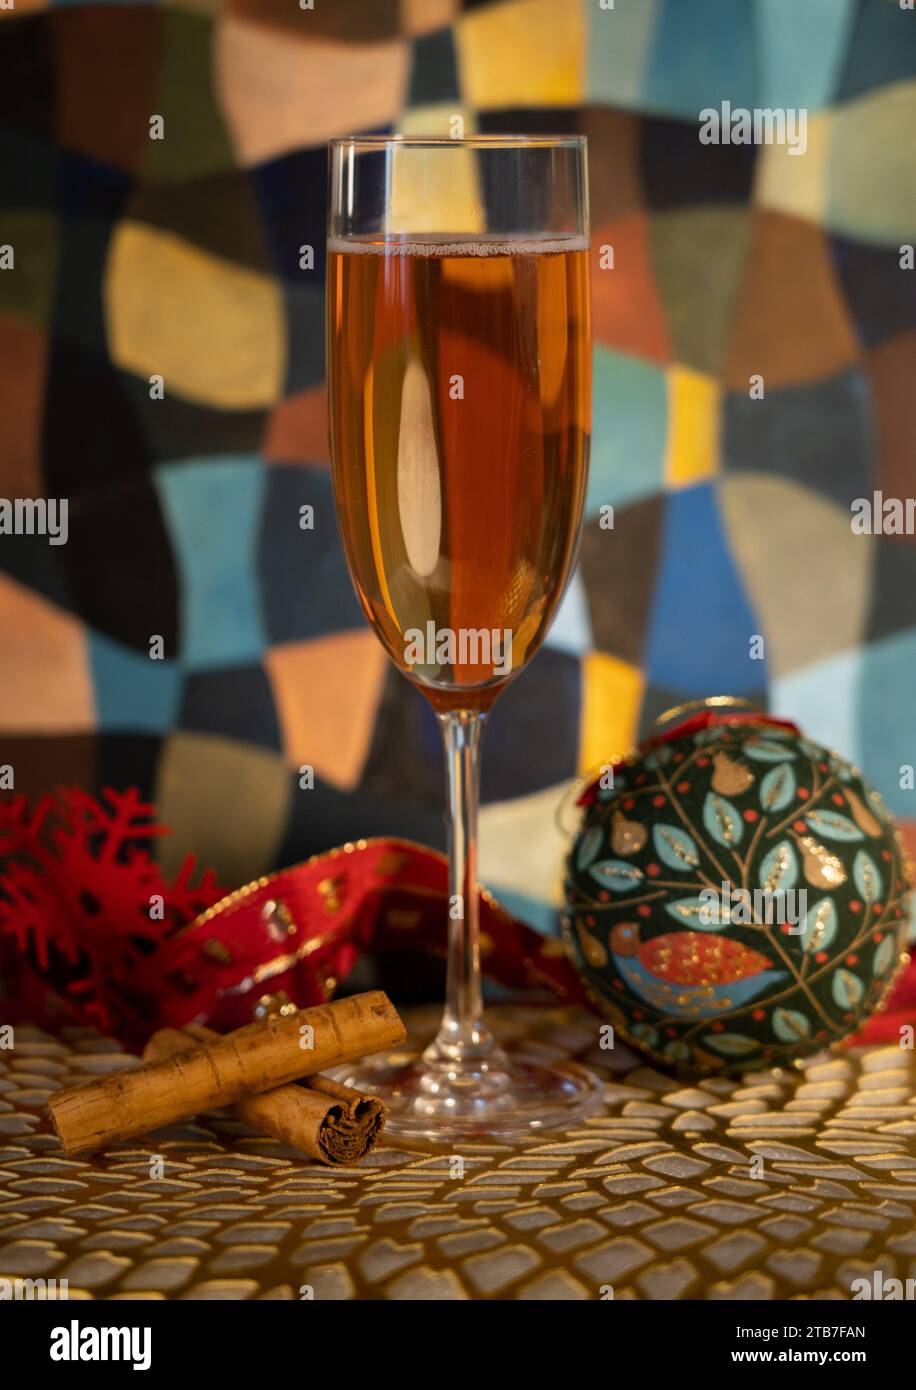 Tall glass of champagne with Christmas decorations including two cinnamon sticks, a green bauble, a red snowflake in front of a painting Stock Photo